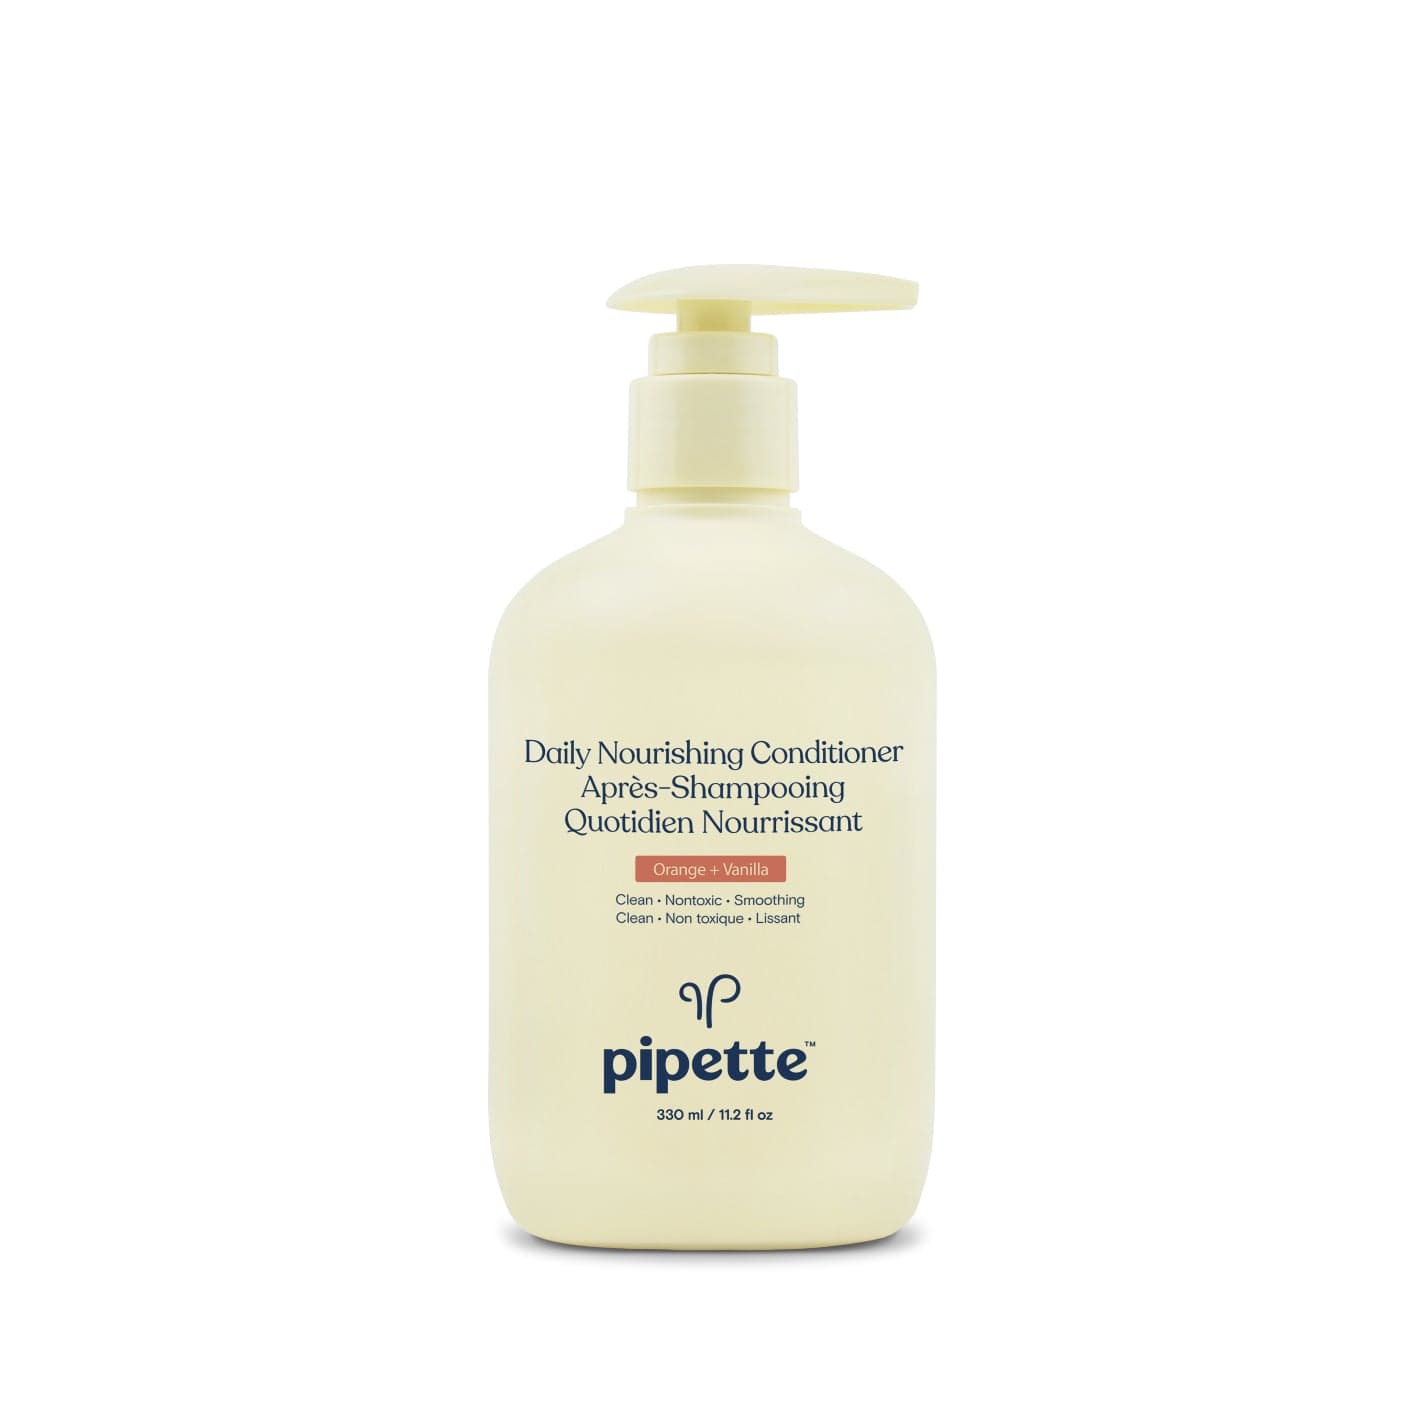 daily nourishing conditioner by pipette baby